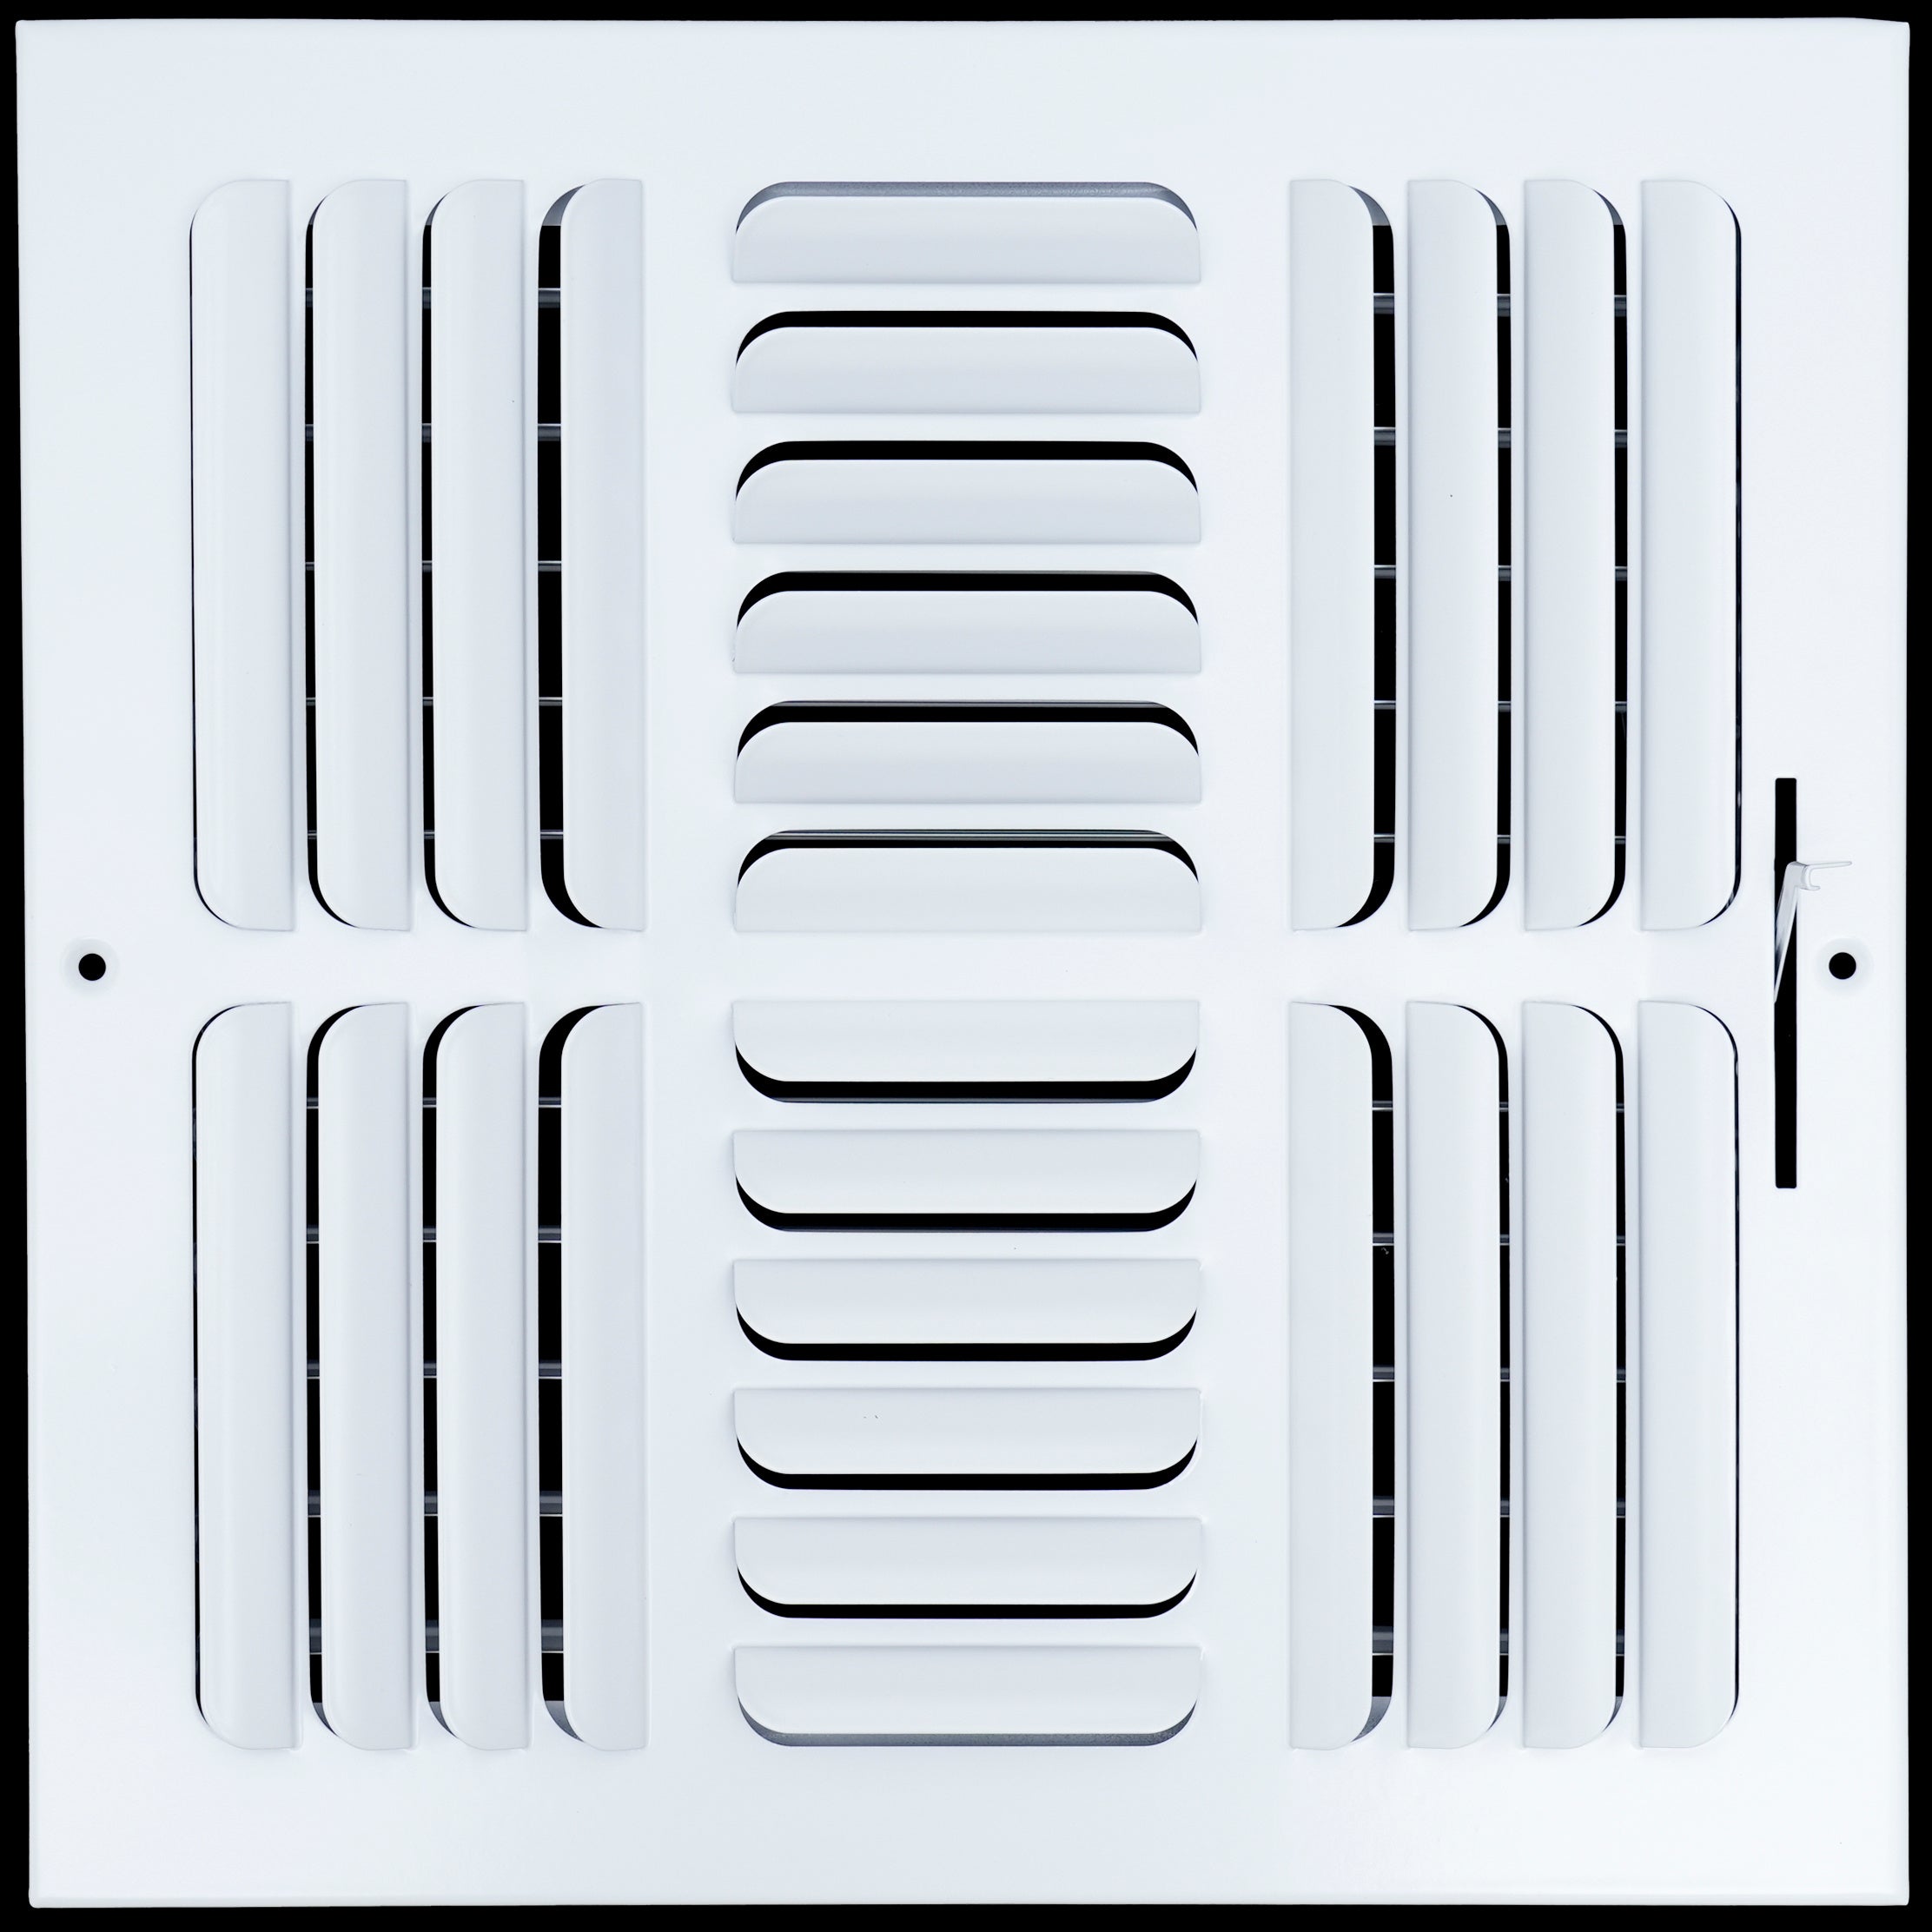 airgrilles 12"w x 12"h 4 way fixed curved blade air supply diffuser  -  register vent cover grill for sidewall and ceiling  -  white  -  outer dimensions: 13.75"w x 13.75"h hnd-cb-wh-4way-12x12  - 1